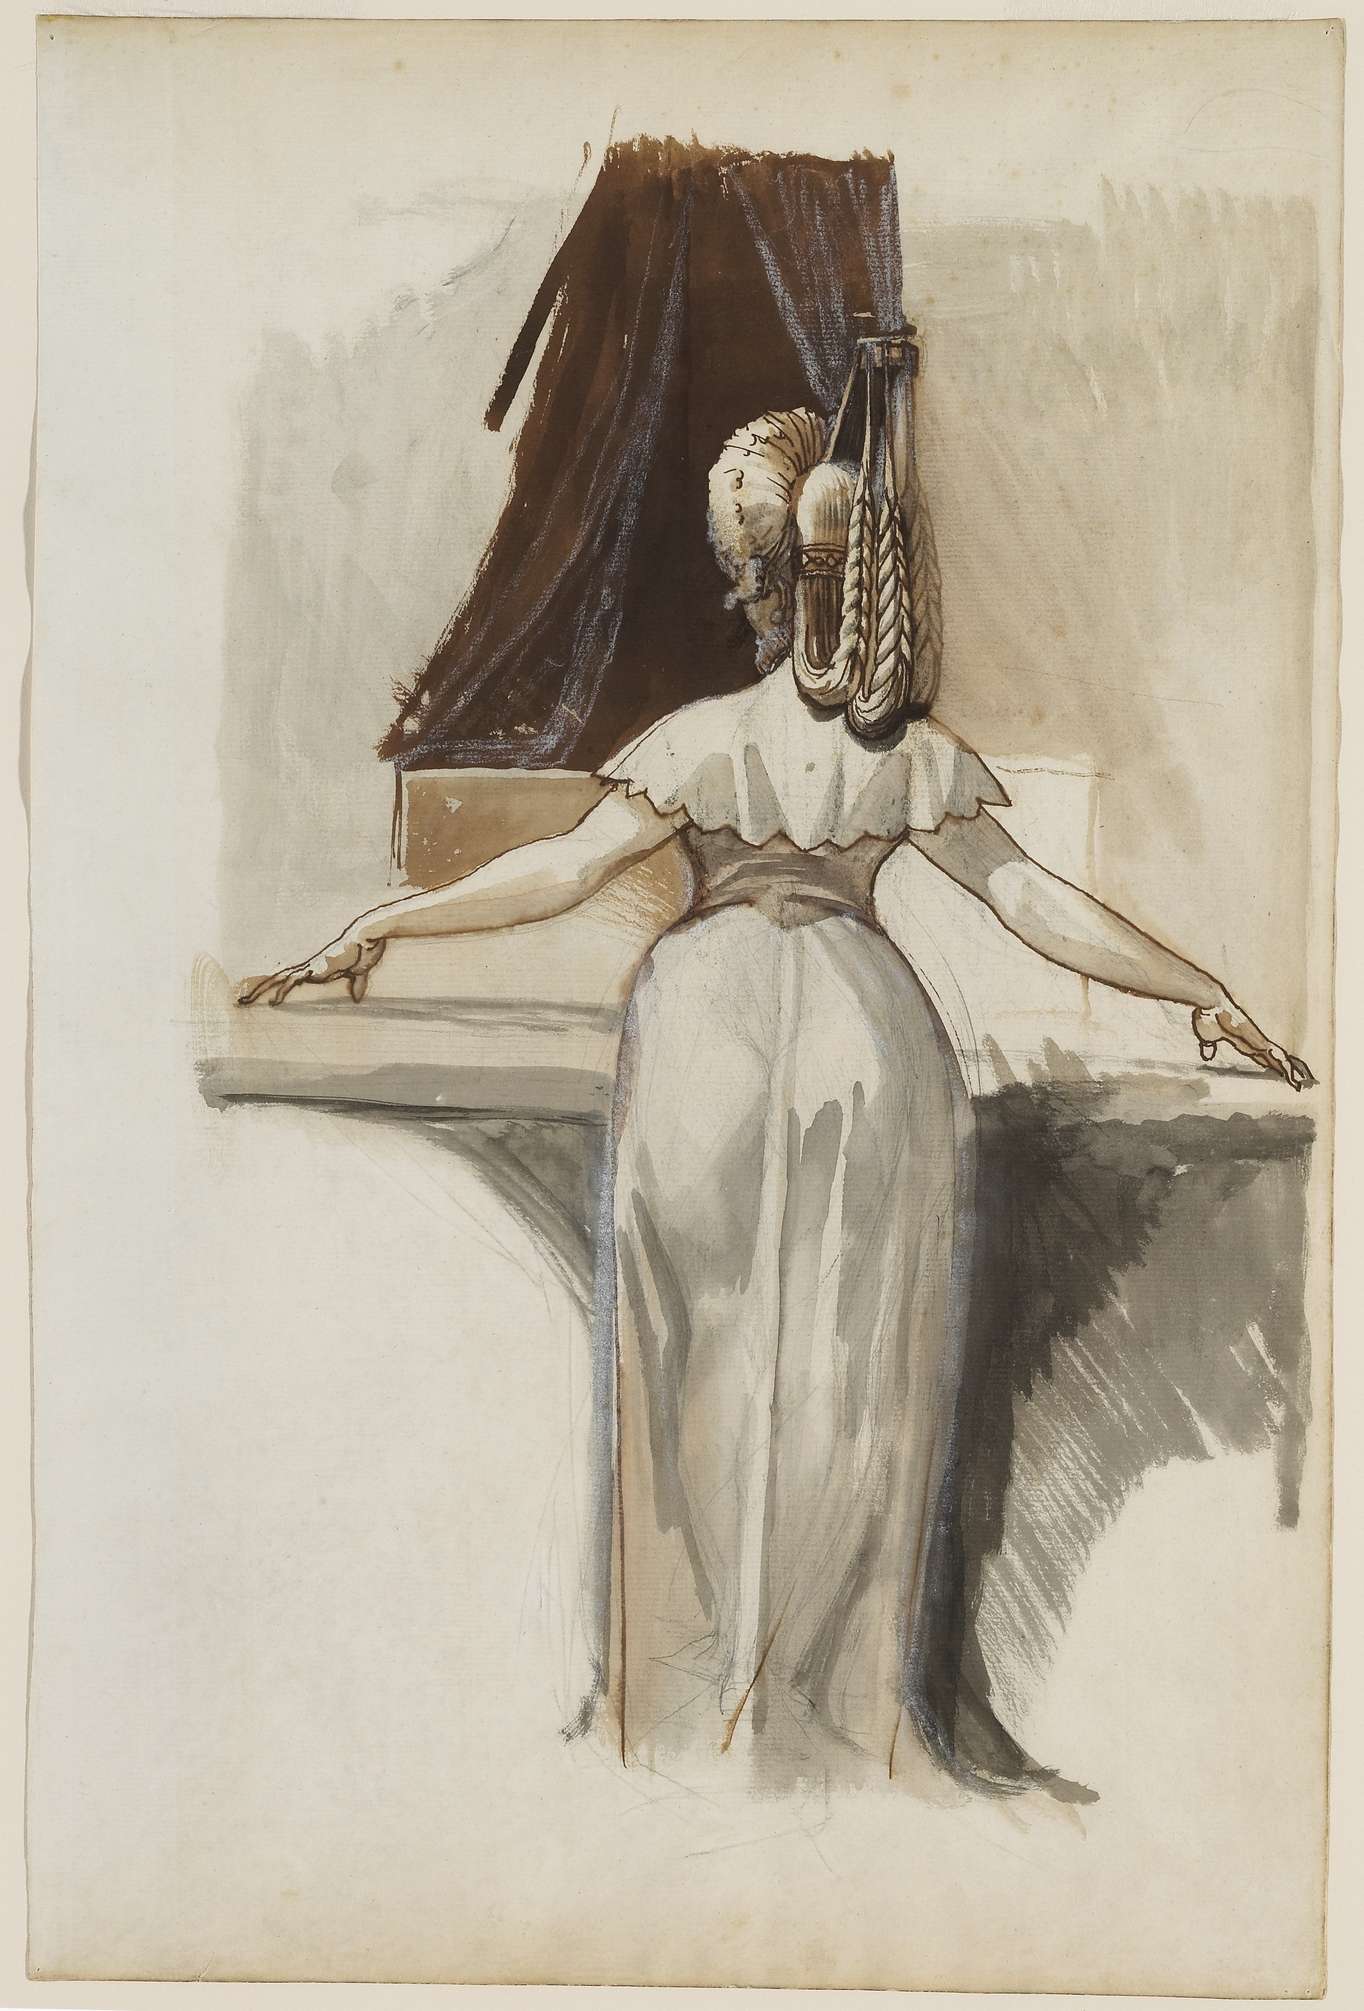 Fussli A Woman Standing at a Dressing Table or Spinet, c. 1790-1792 National Gallery Ottawa